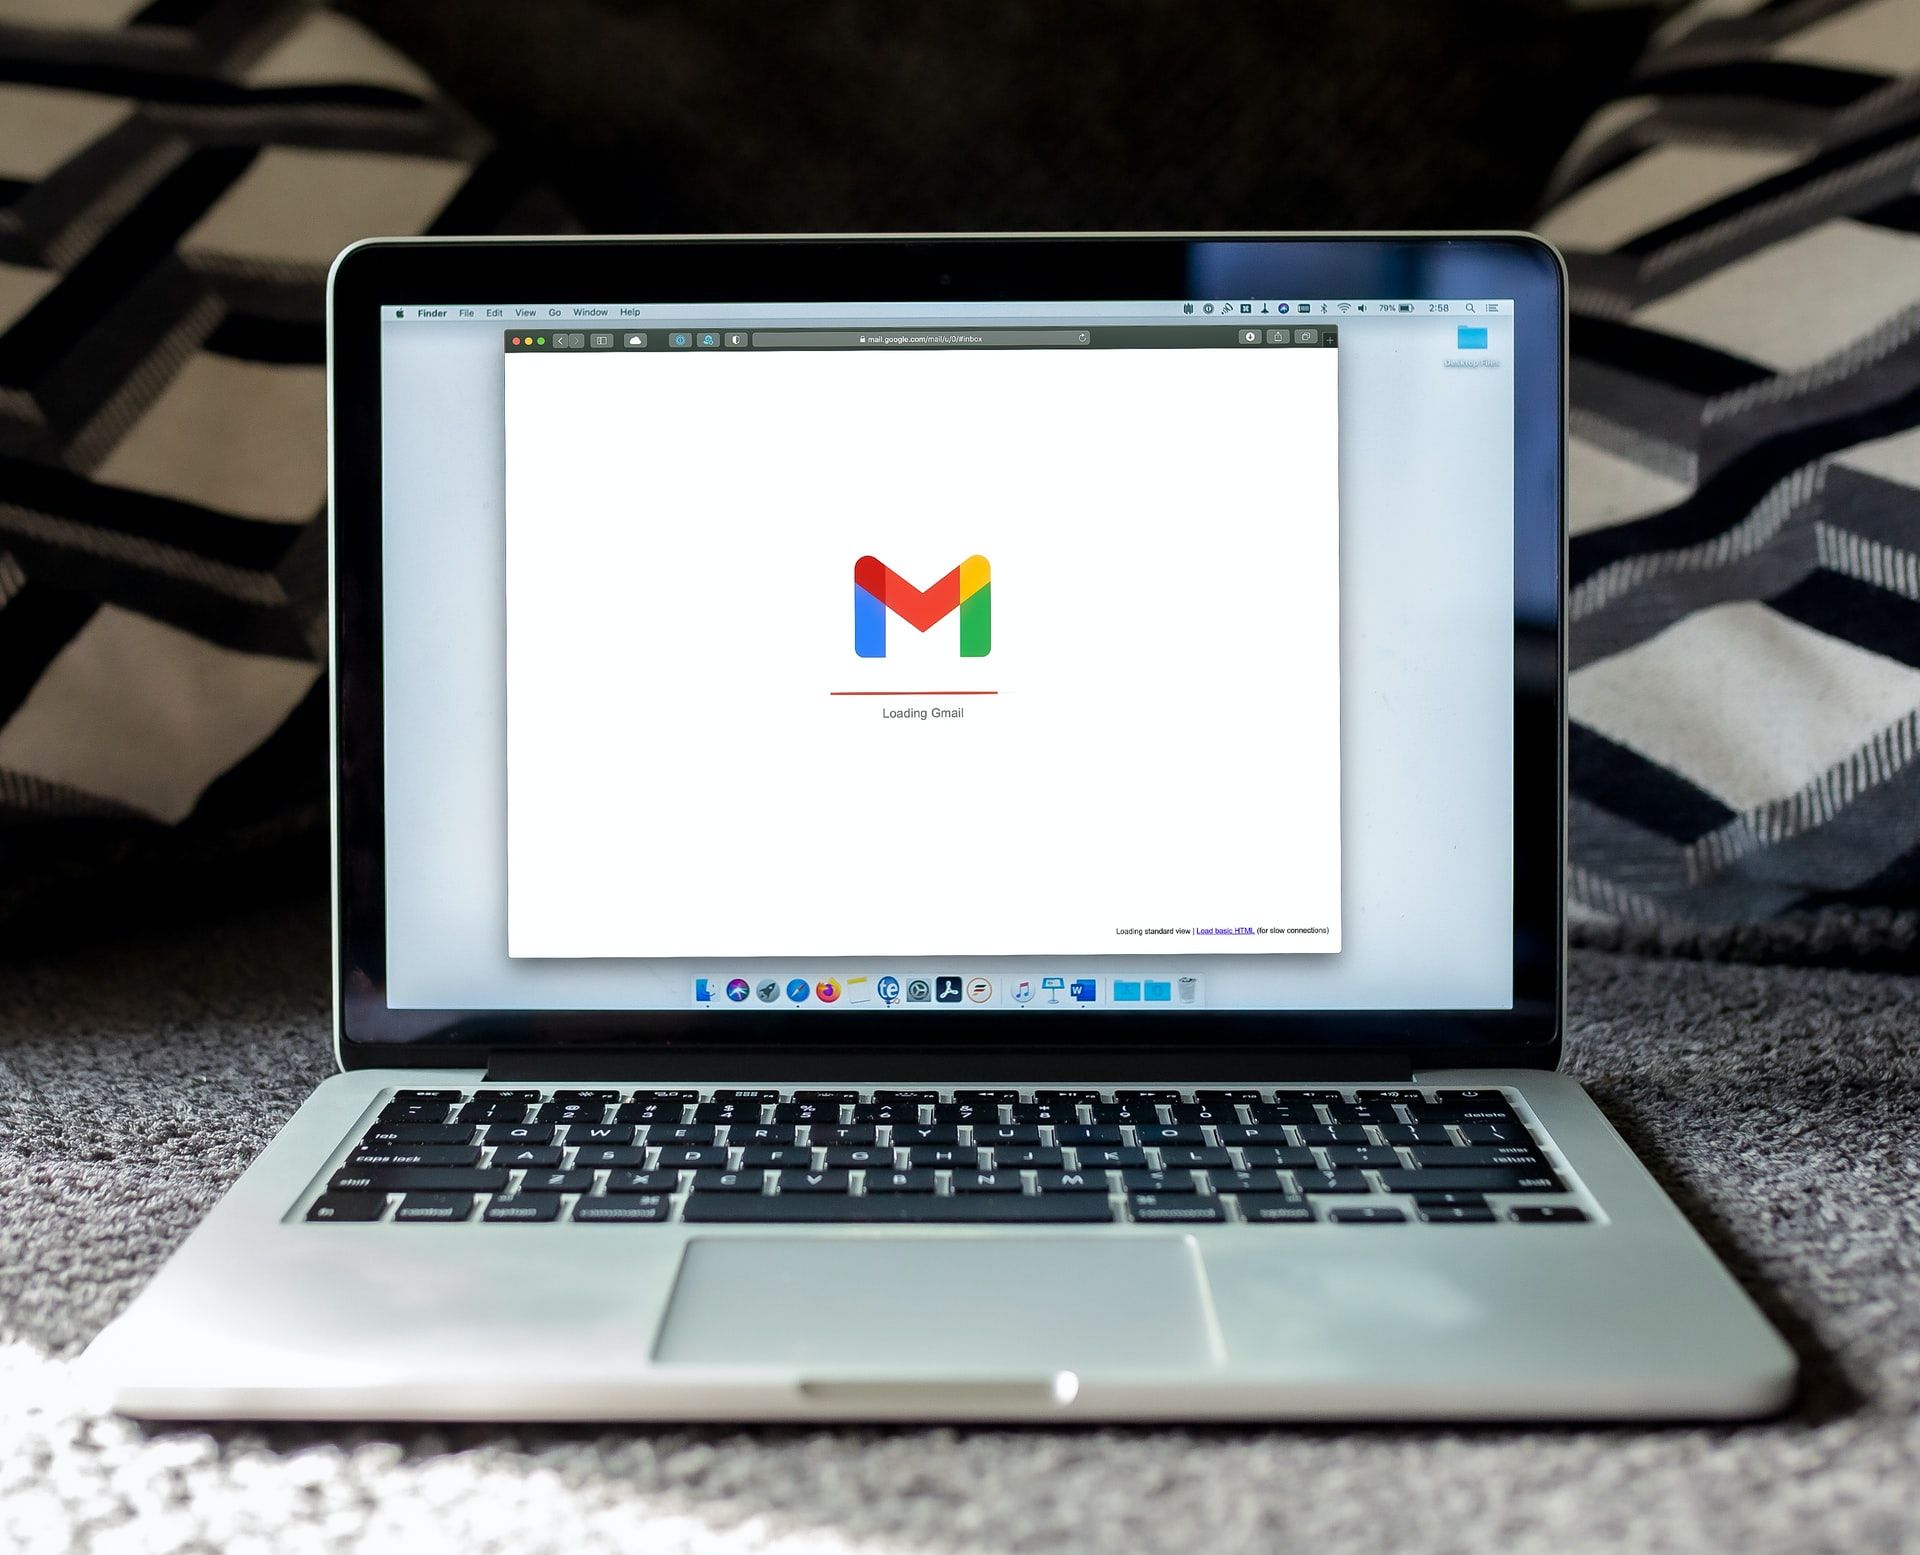 Image shows a laptop screen featuring the Gmail loading screen